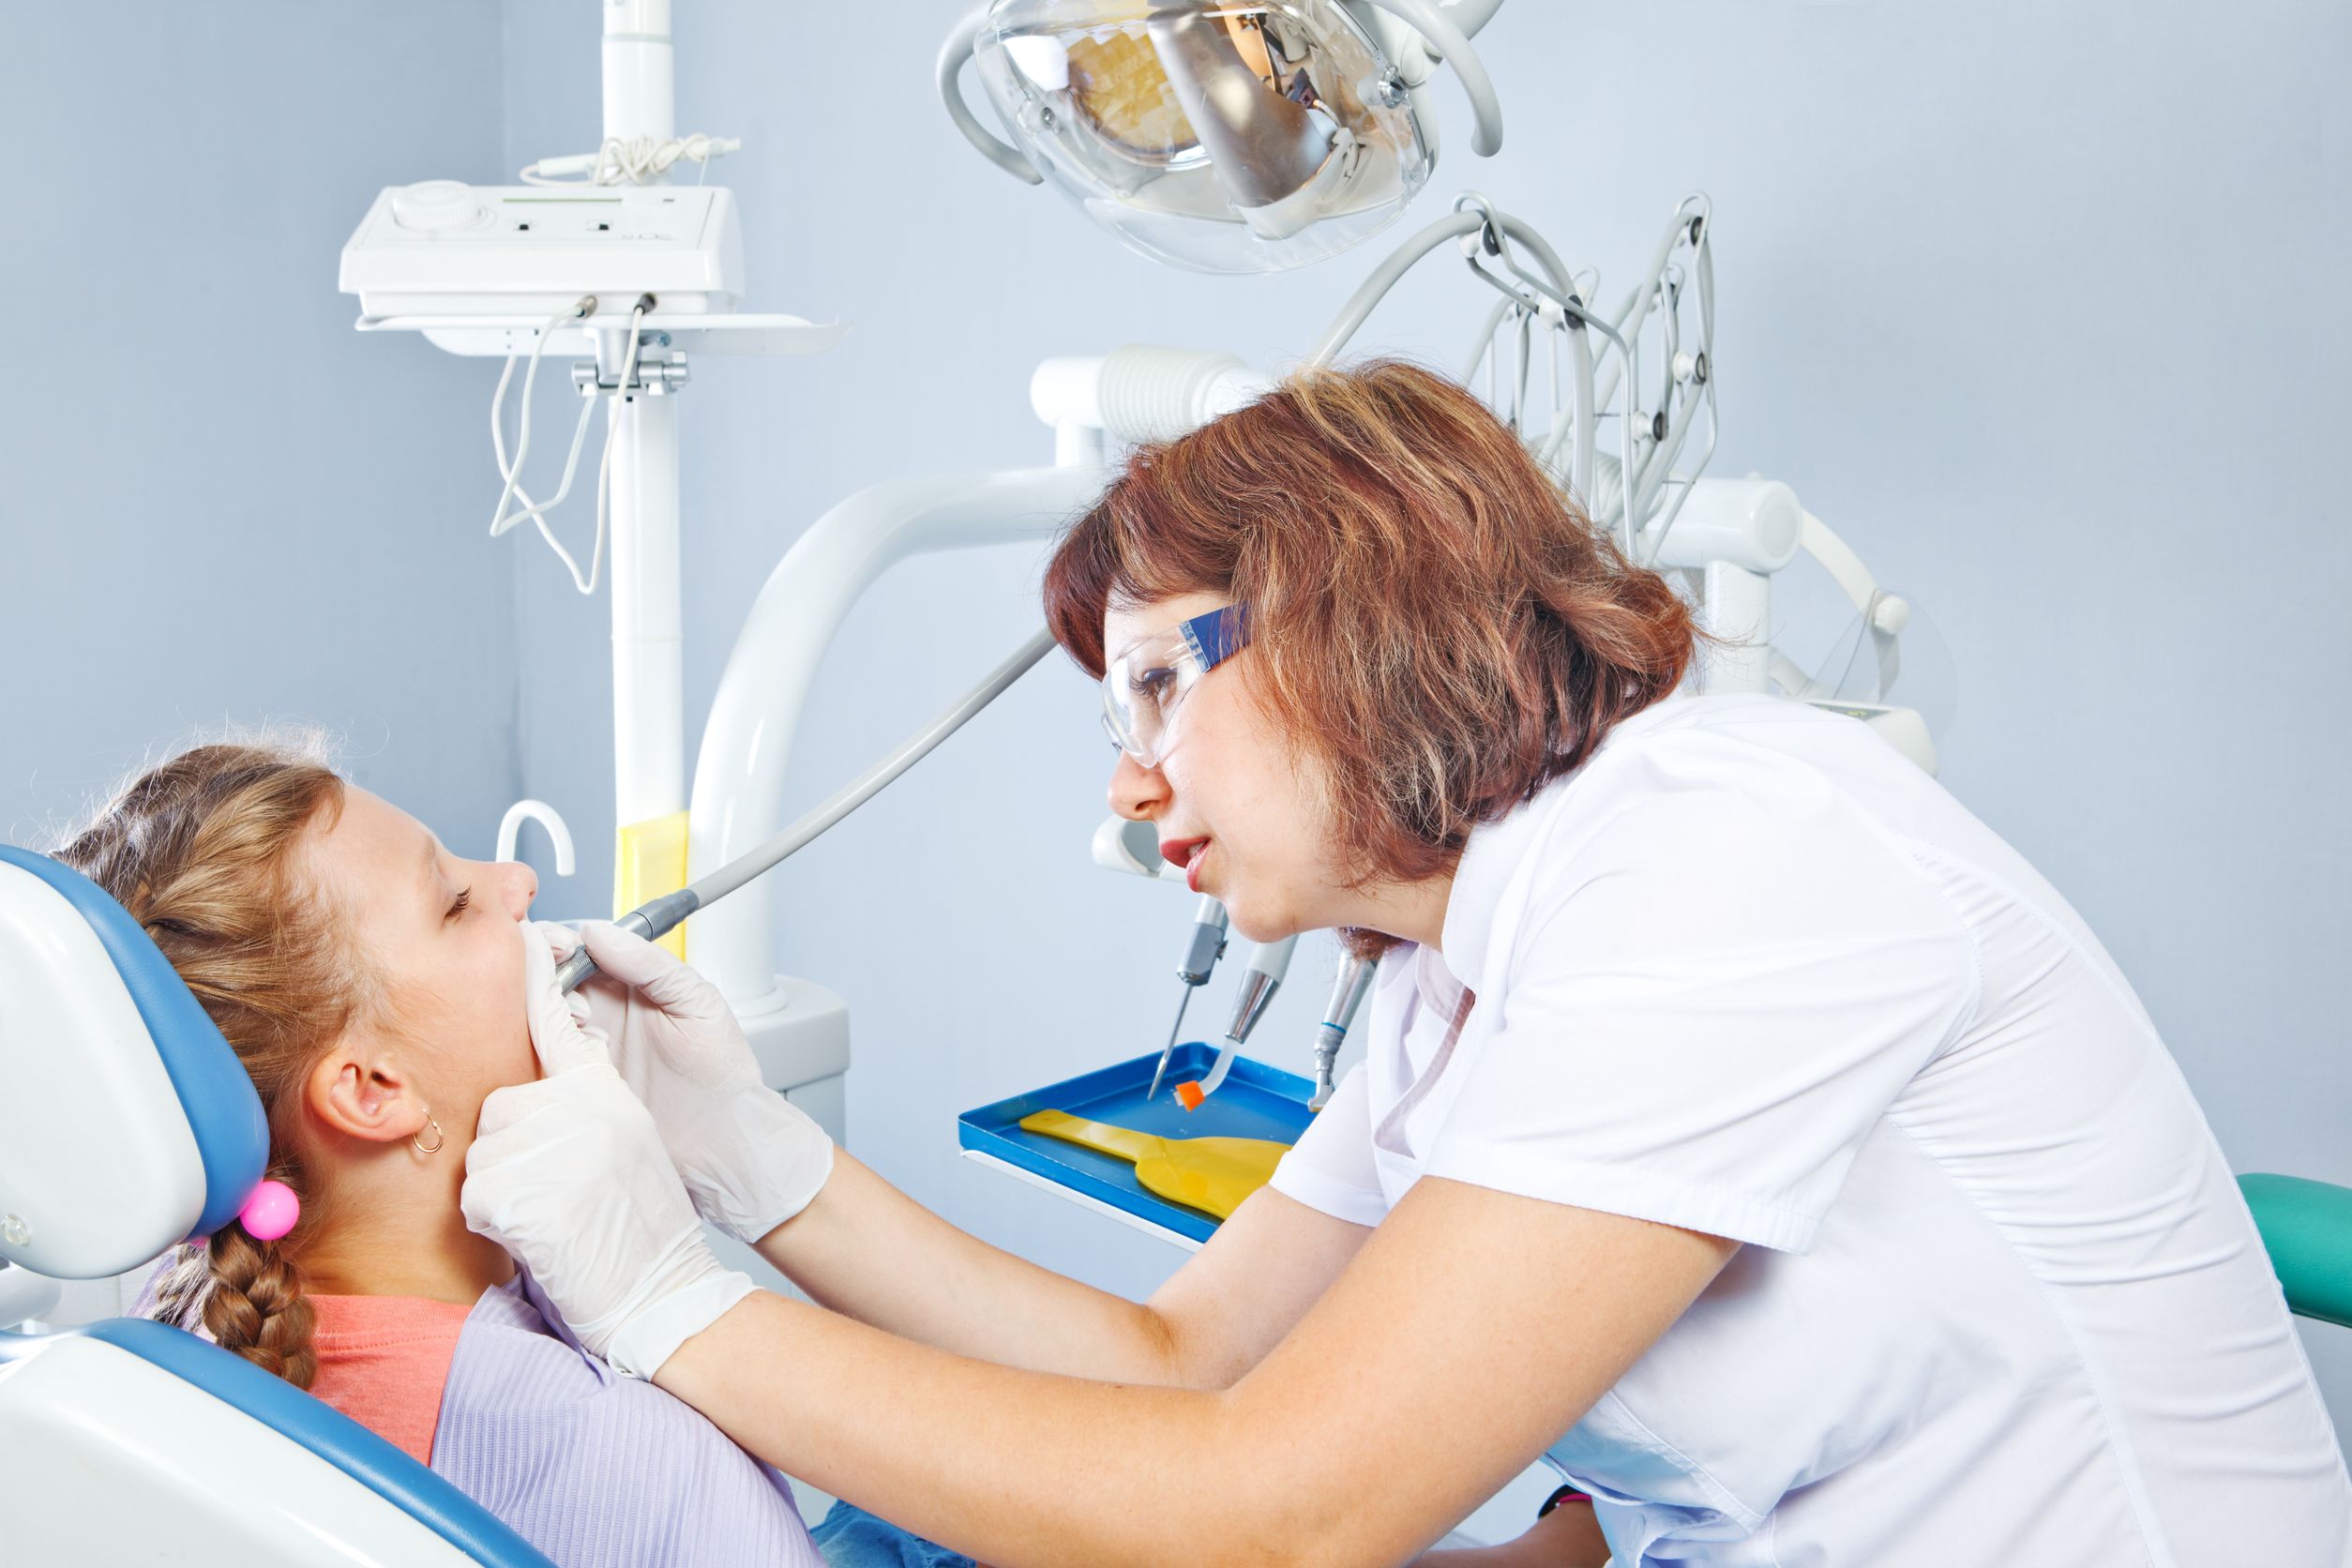 Are You in Need of Sedation Dentistry in Lafayette, LA?